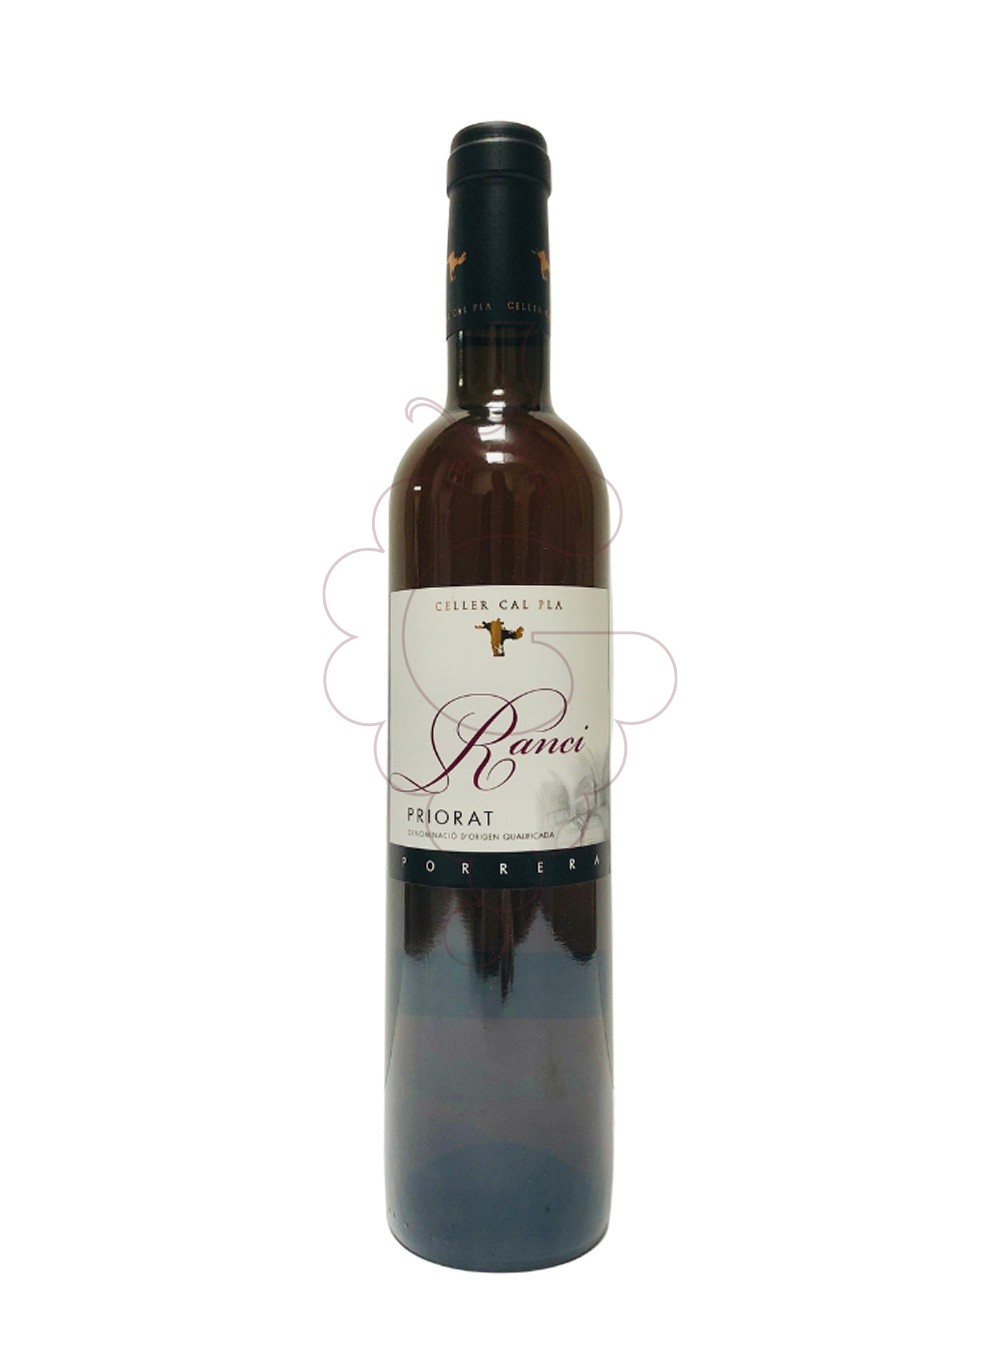 Photo Ranci celler cal pla 50 cl fortified wine